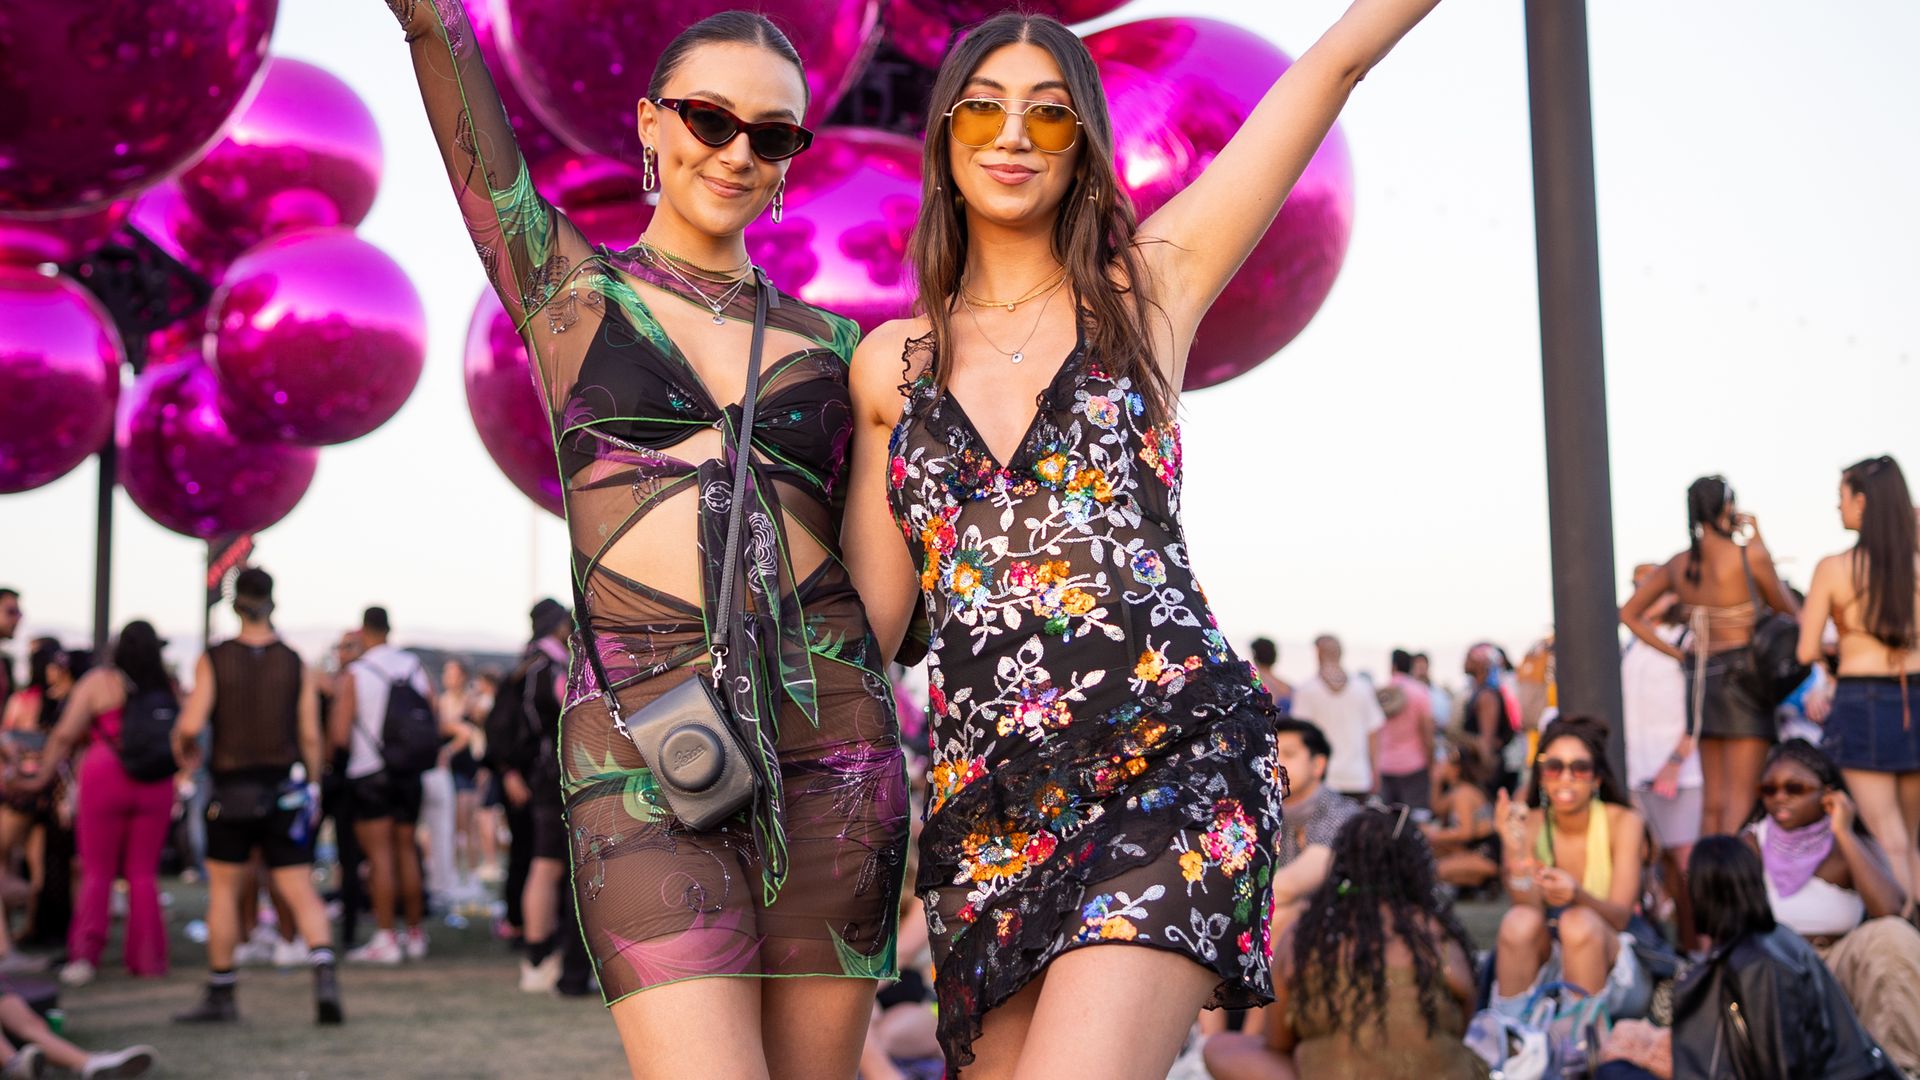 INDIO, CALIFORNIA - APRIL 15: Festivalgoers attend the 2023 Coachella Valley Music and Arts Festival on April 15, 2023 in Indio, California. (Photo by Emma McIntyre/Getty Images for Coachella)